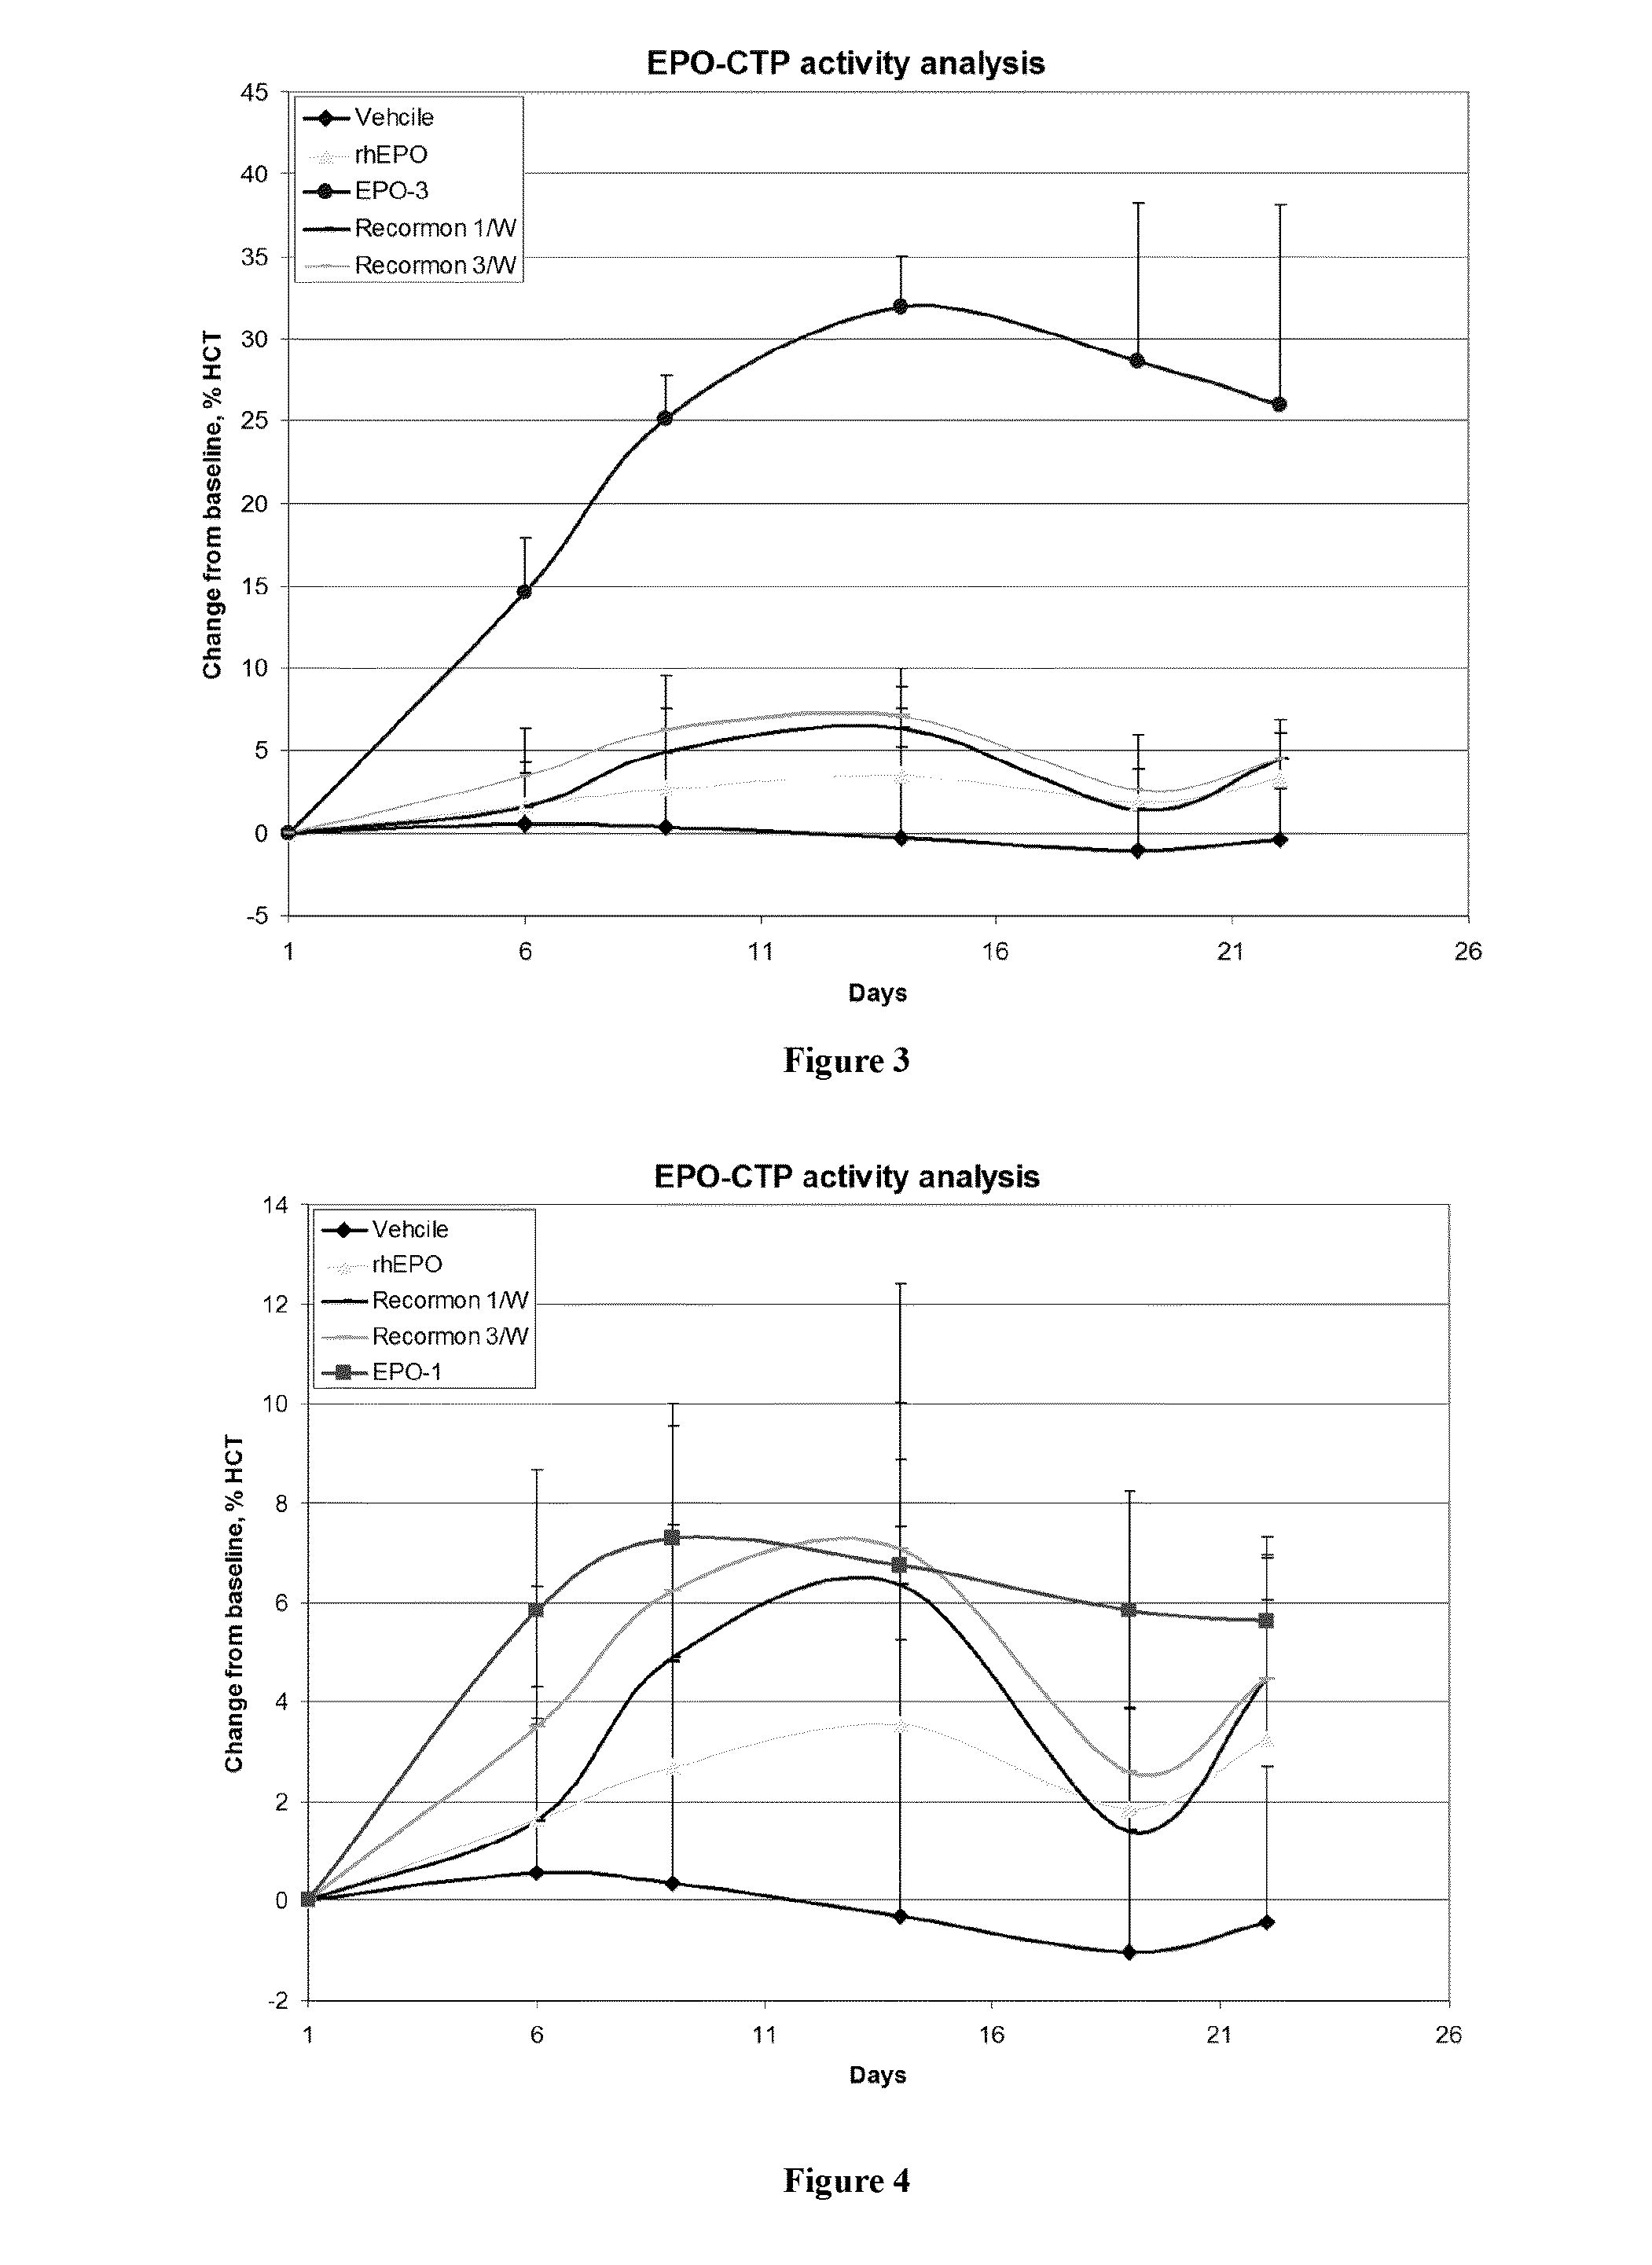 Long-acting polypeptides and methods of producing and administering same